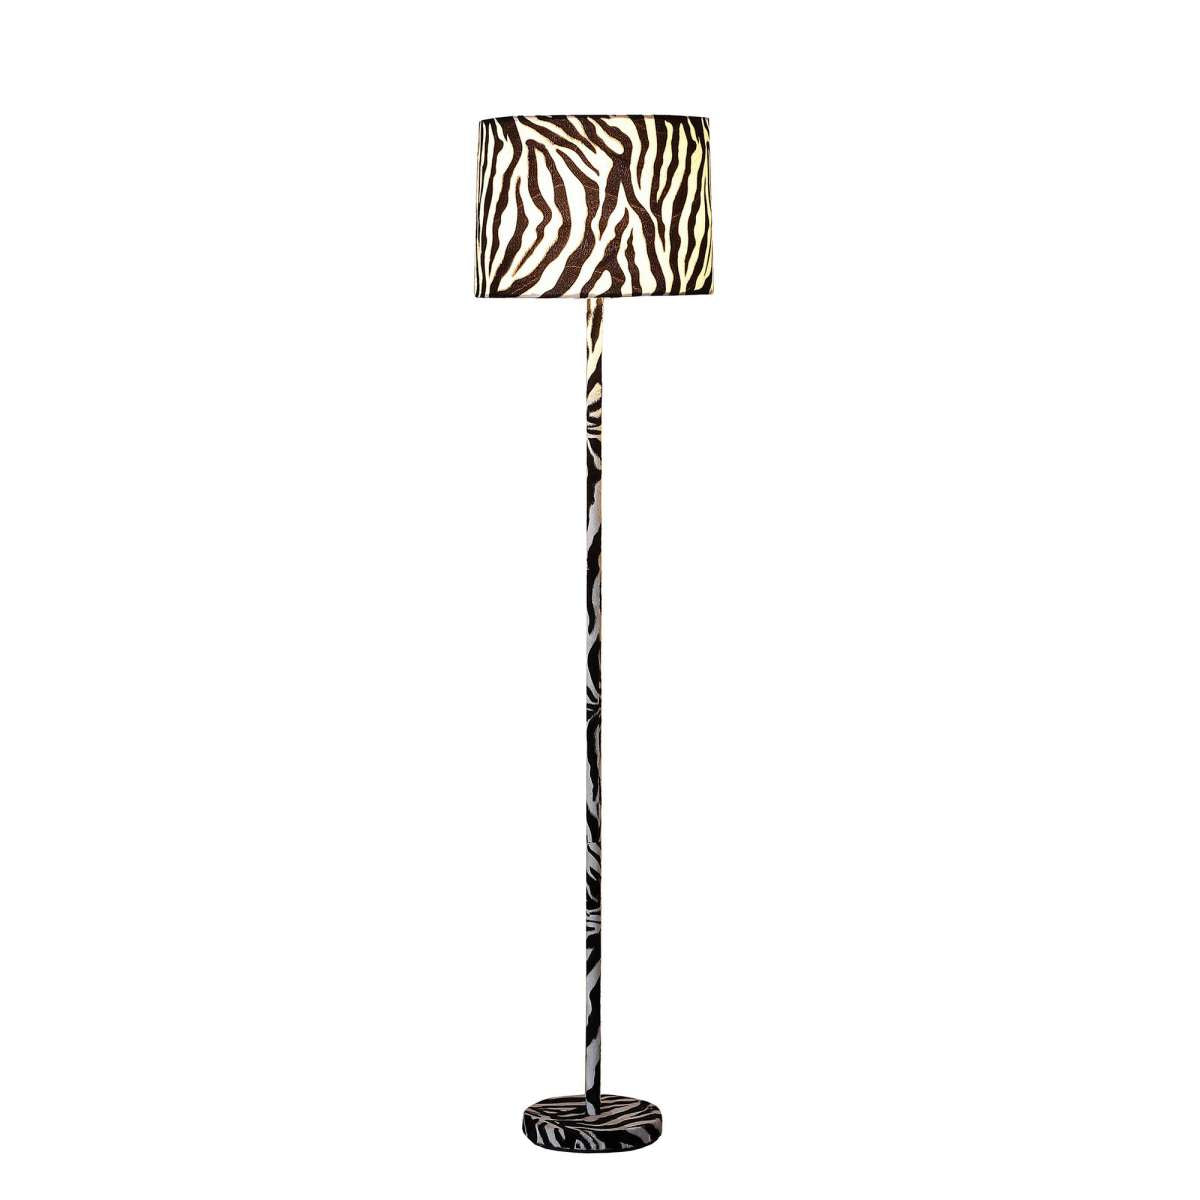 Fabric Wrapped Floor Lamp With Animal Print, White And Black By Benzara